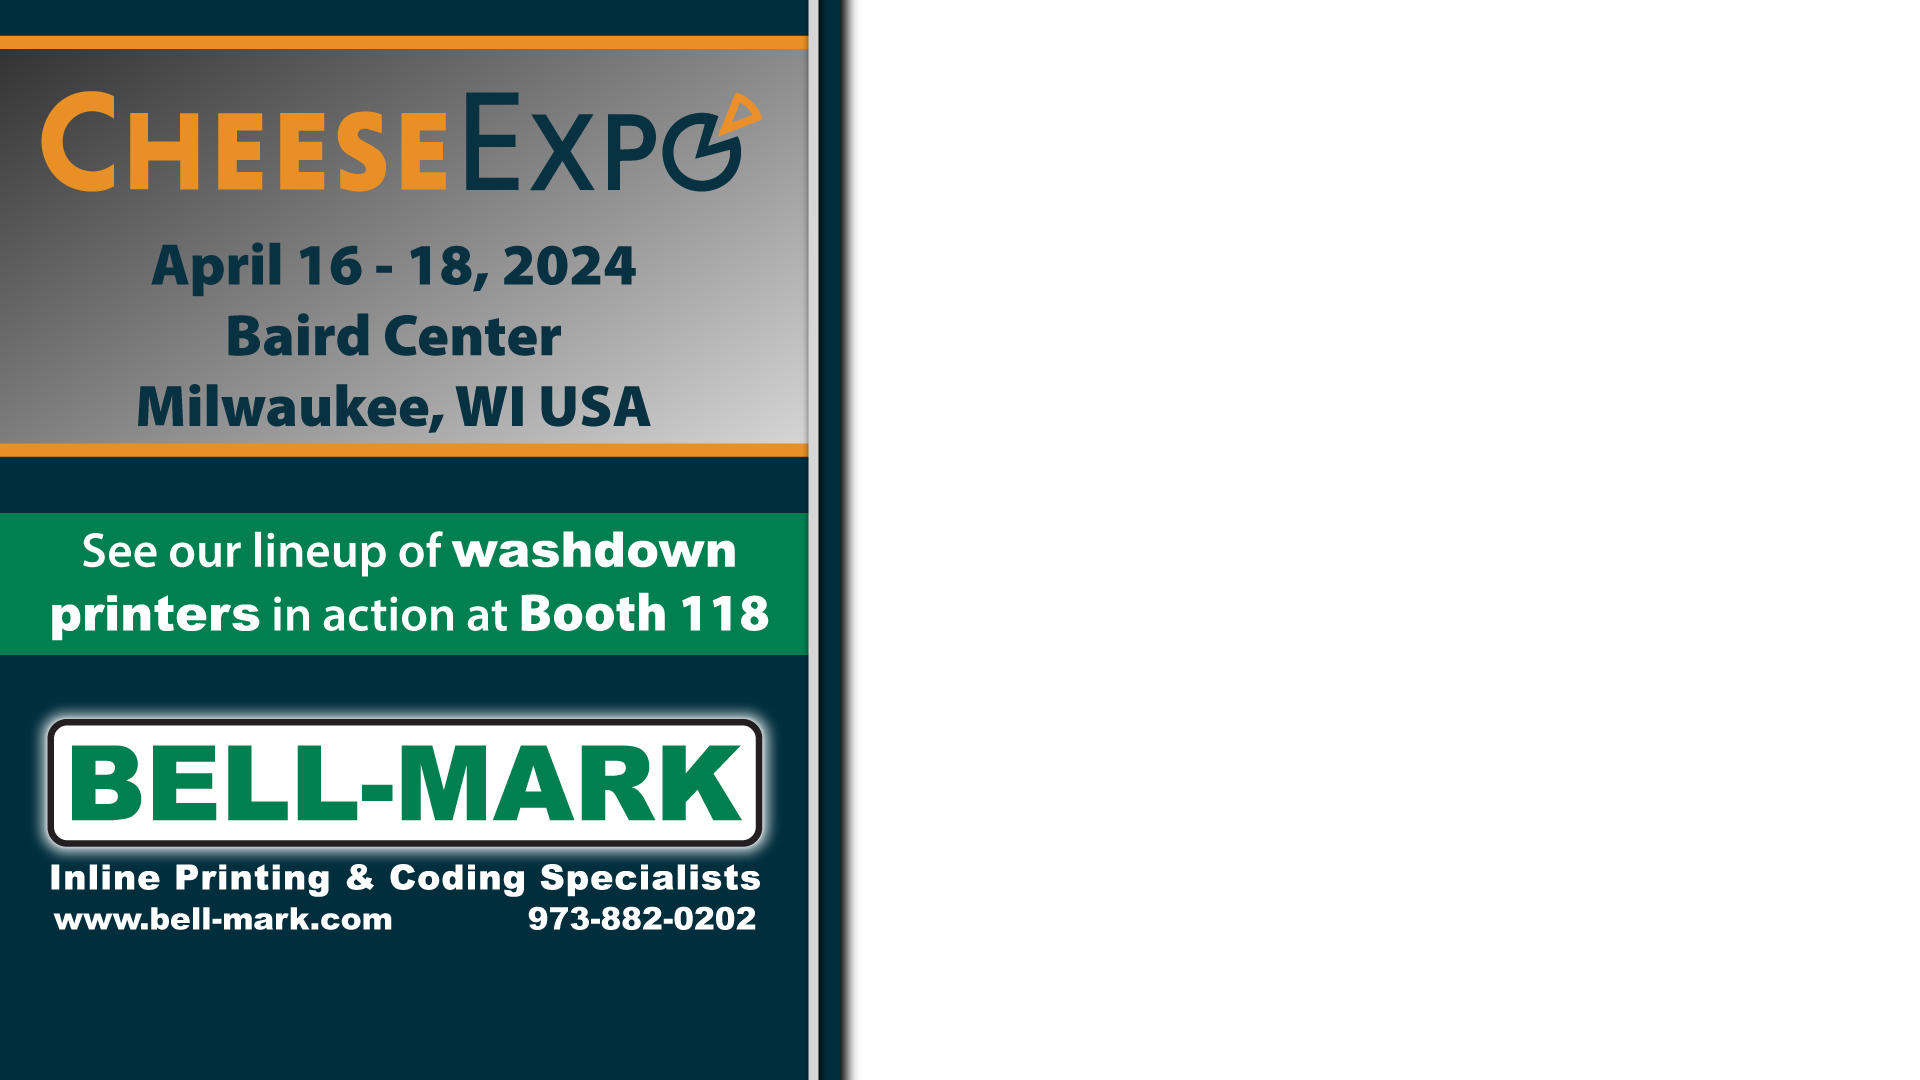 Cheese Expo | April 16 - 18, 2024 | Baird Center | Milwaukee, WI USA | See our lineup of washdown printers in action at
										Booth 118 | BELL-MARK - Inline printing & coding specialists | www.bell-mark .com | 973-882-0202